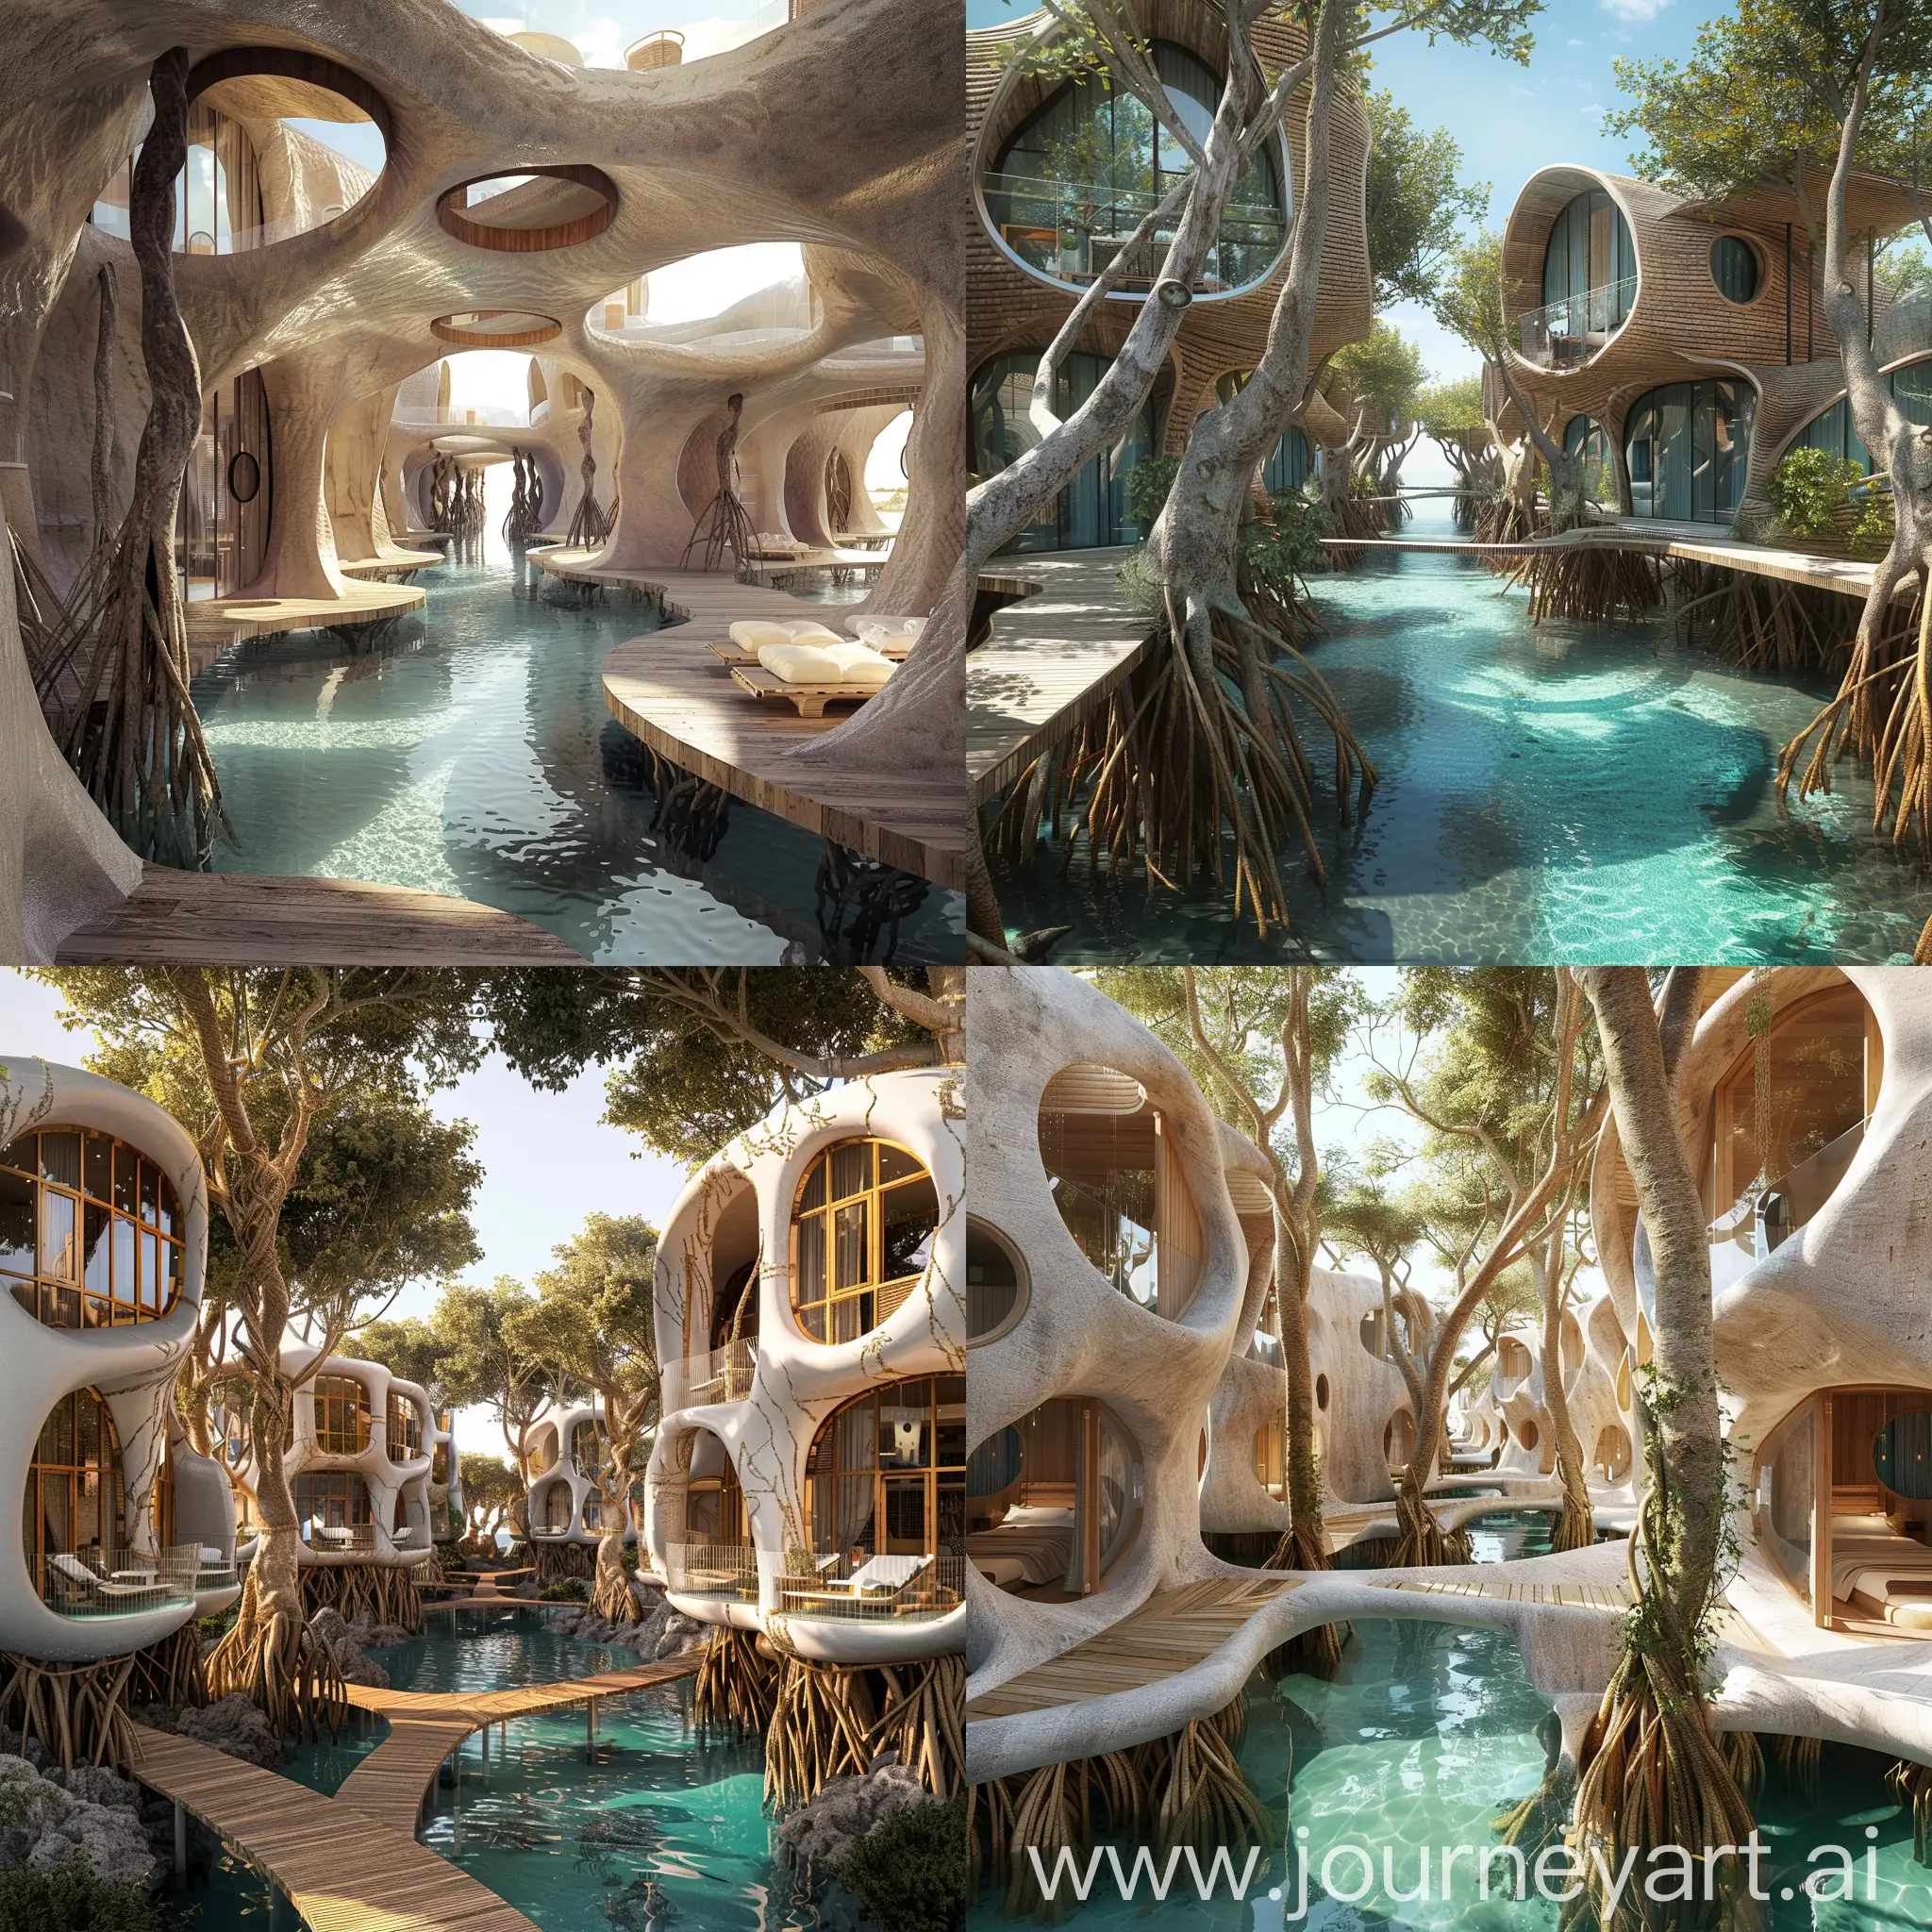 generate an image by Imaging a resort layout where the architectural design harmoniously intertwines with the natural environment of Sharm El Sheikh. The villas are constructed with flowing lines and organic shapes, reminiscent of the mangrove trees' intricate root systems. These structures are elevated on stilts, allowing guests to wander through the resort as if they're exploring a mangrove forest.

The rooms and suites of the hotel are designed with a nautical theme, featuring porthole windows and marine-inspired decor that pay homage to the SS Thistlegorm. The resort's pathways lead to a central lagoon pool, mirroring the tranquil waters found among mangroves, and the pool area is adorned with reclaimed wood and metal pieces, evoking the shipwreck's rustic charm.

Sustainability is at the heart of the resort's ethos, with solar panels integrated into the design and water recycling systems that reflect the self-sustaining nature of mangrove ecosystems. The resort also offers diving excursions to the actual SS Thistlegorm wreck, providing an authentic connection to the historical inspiration behind its conception. 

This resort isn't just a place to stay; it's an immersive experience that celebrates the beauty of Sharm El Sheikh's natural and historical treasures. 🌊🌴🚢